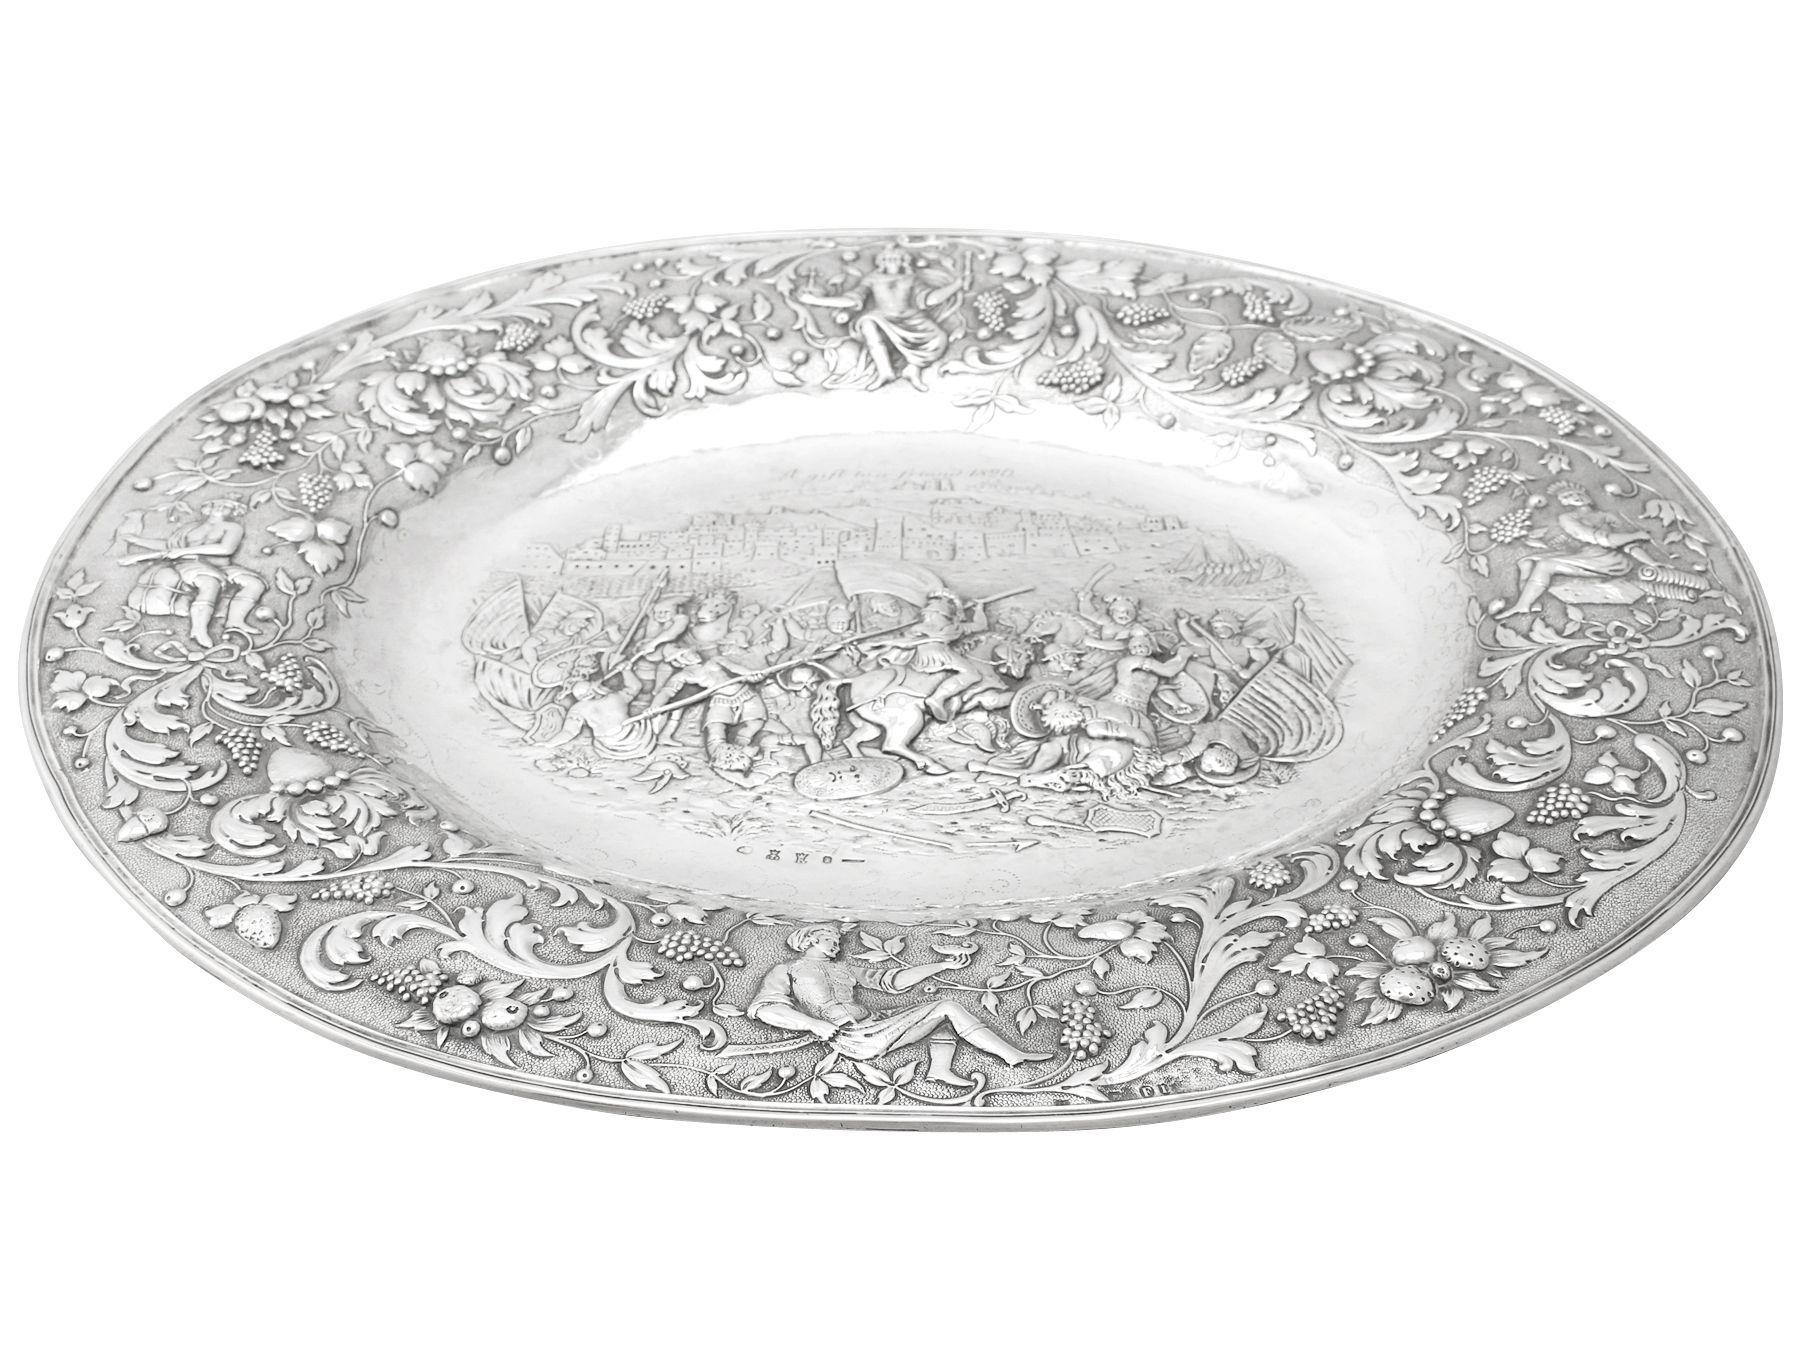 A magnificent, fine and impressive, large antique German sterling silver charger plate.

This magnificent antique German sterling silver charger plate has an oval form.

The surface of the charger plate is embellished with an exceptional